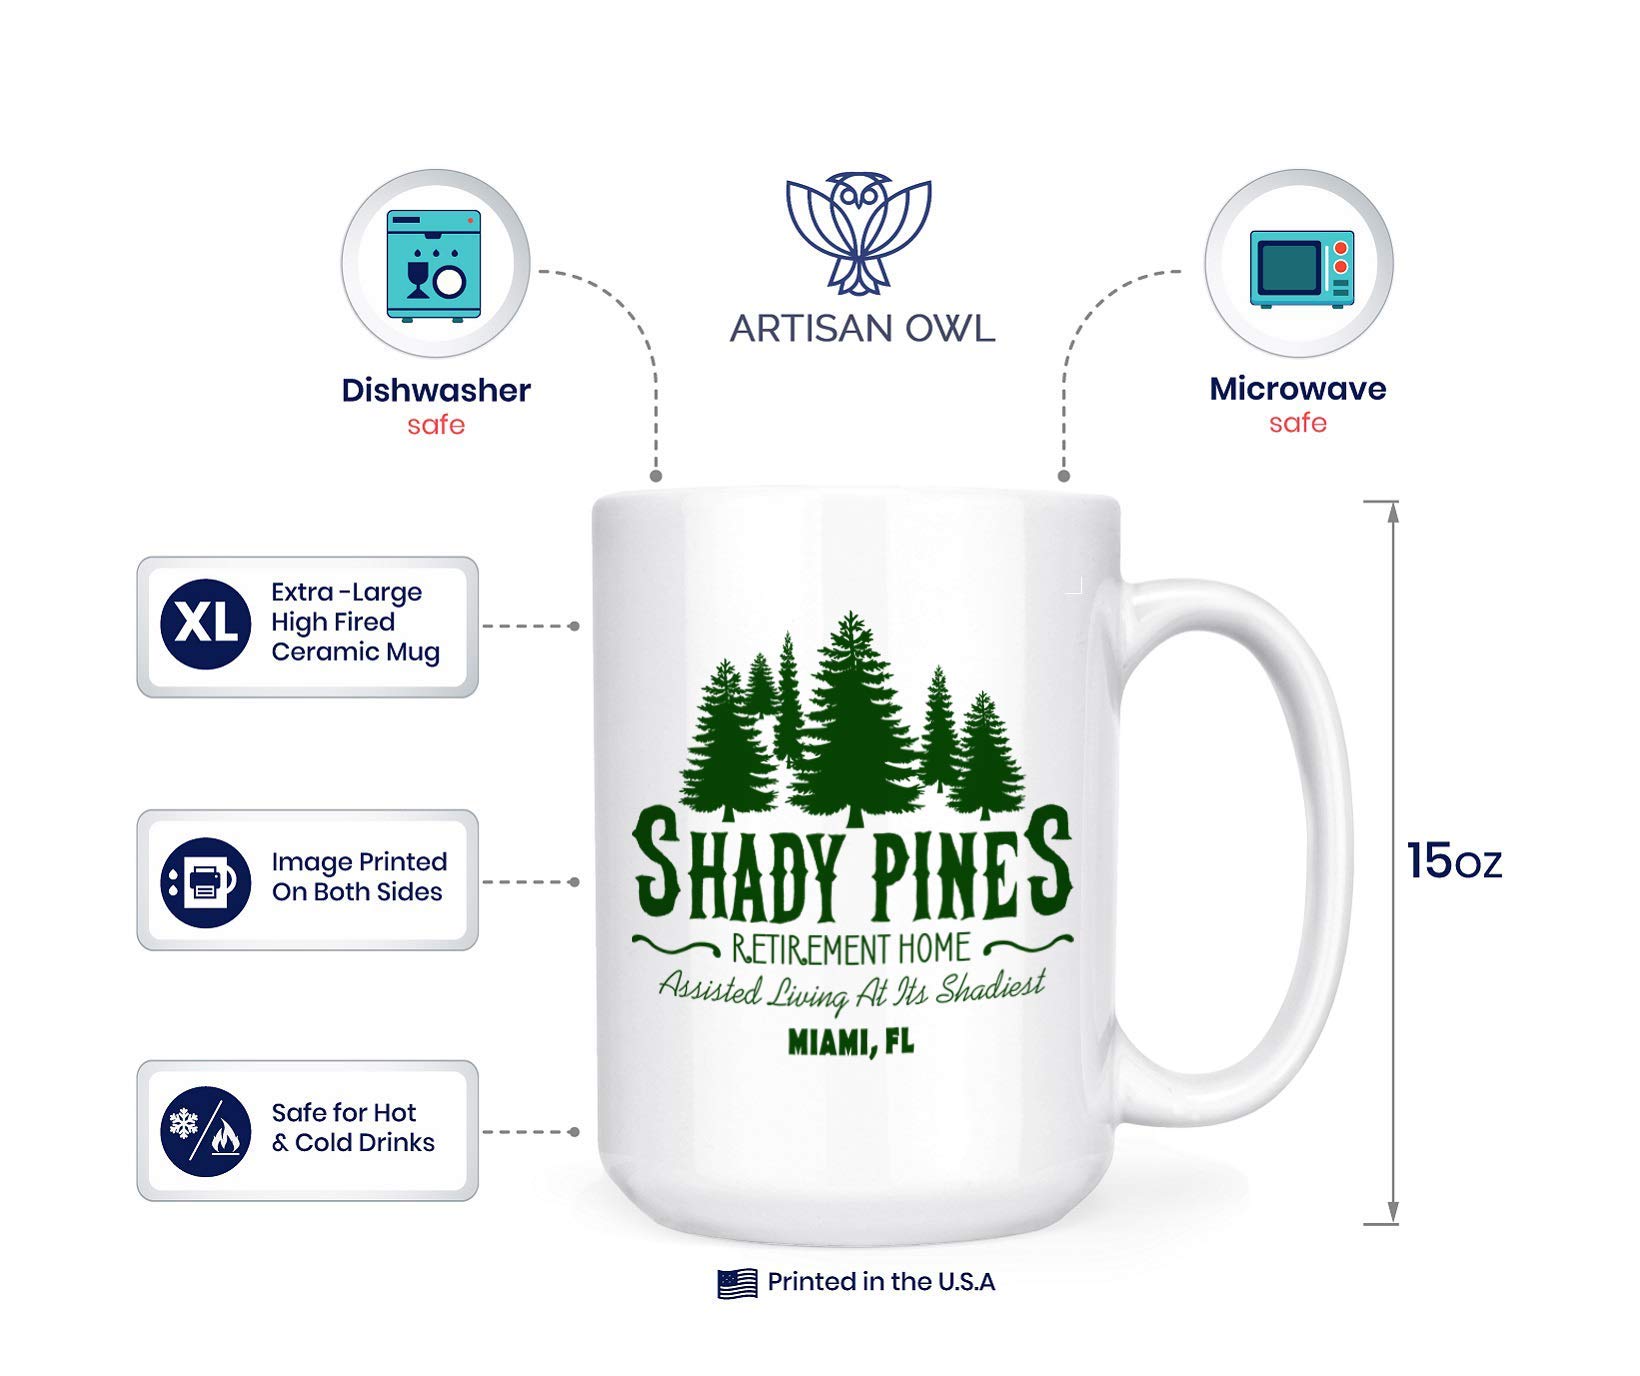 Artisan Owl White Shady Pines Retirement Home 15oz Coffee Mug and Thank You For Being A Friend 17oz Stemless Wine Glass Bundle